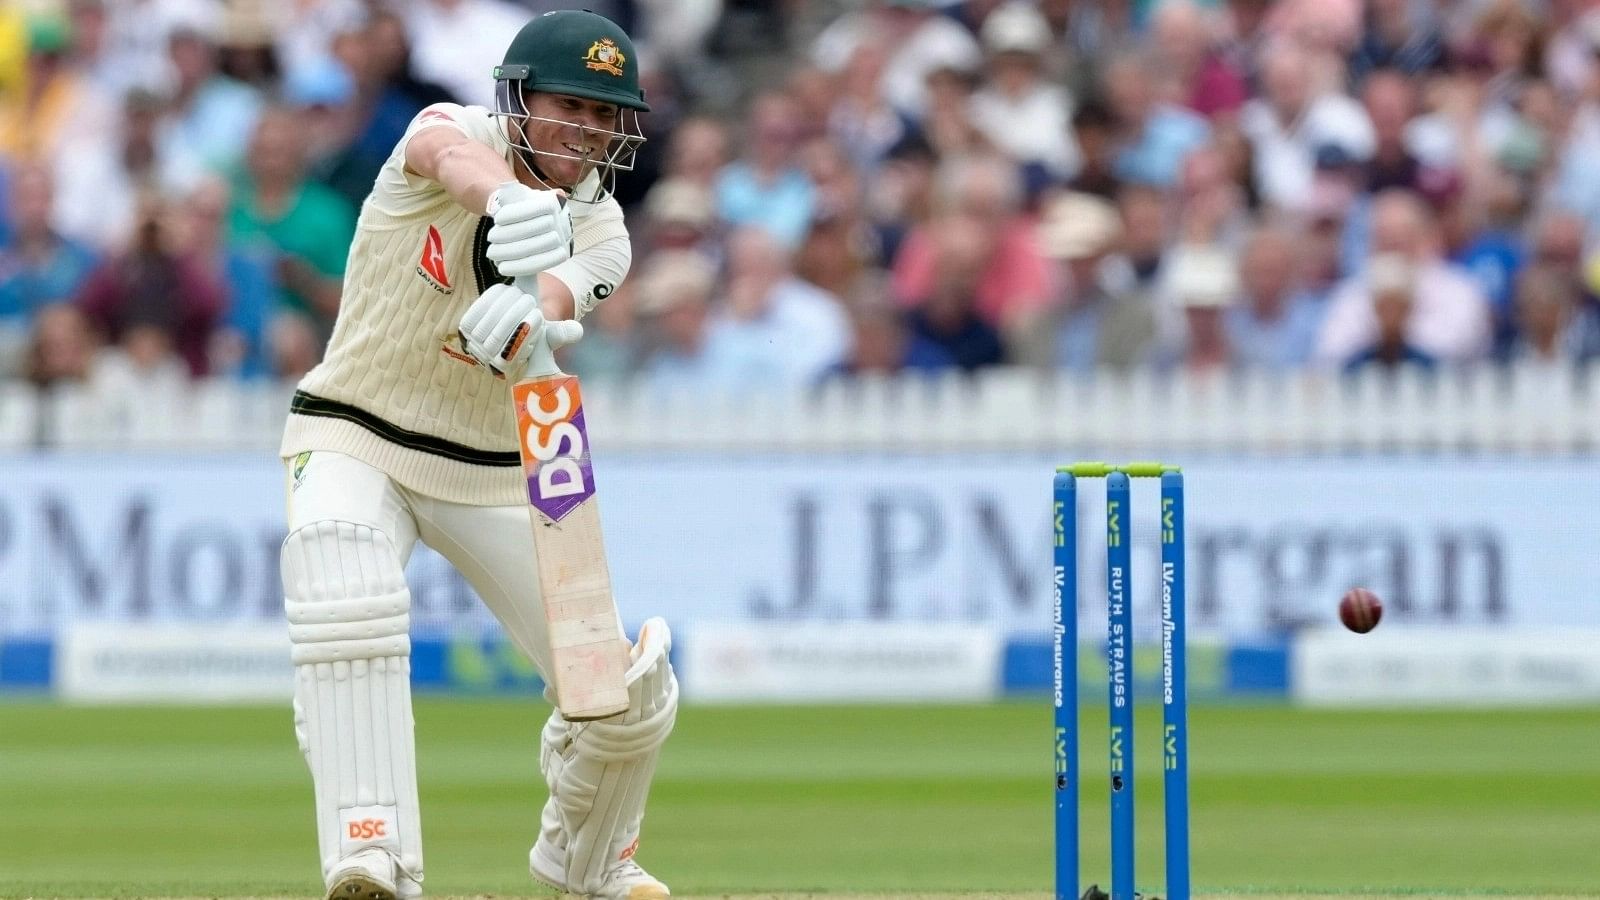 <div class="paragraphs"><p>David Warner is currently playing his last Test match at the Sydney Cricket Ground.</p></div>